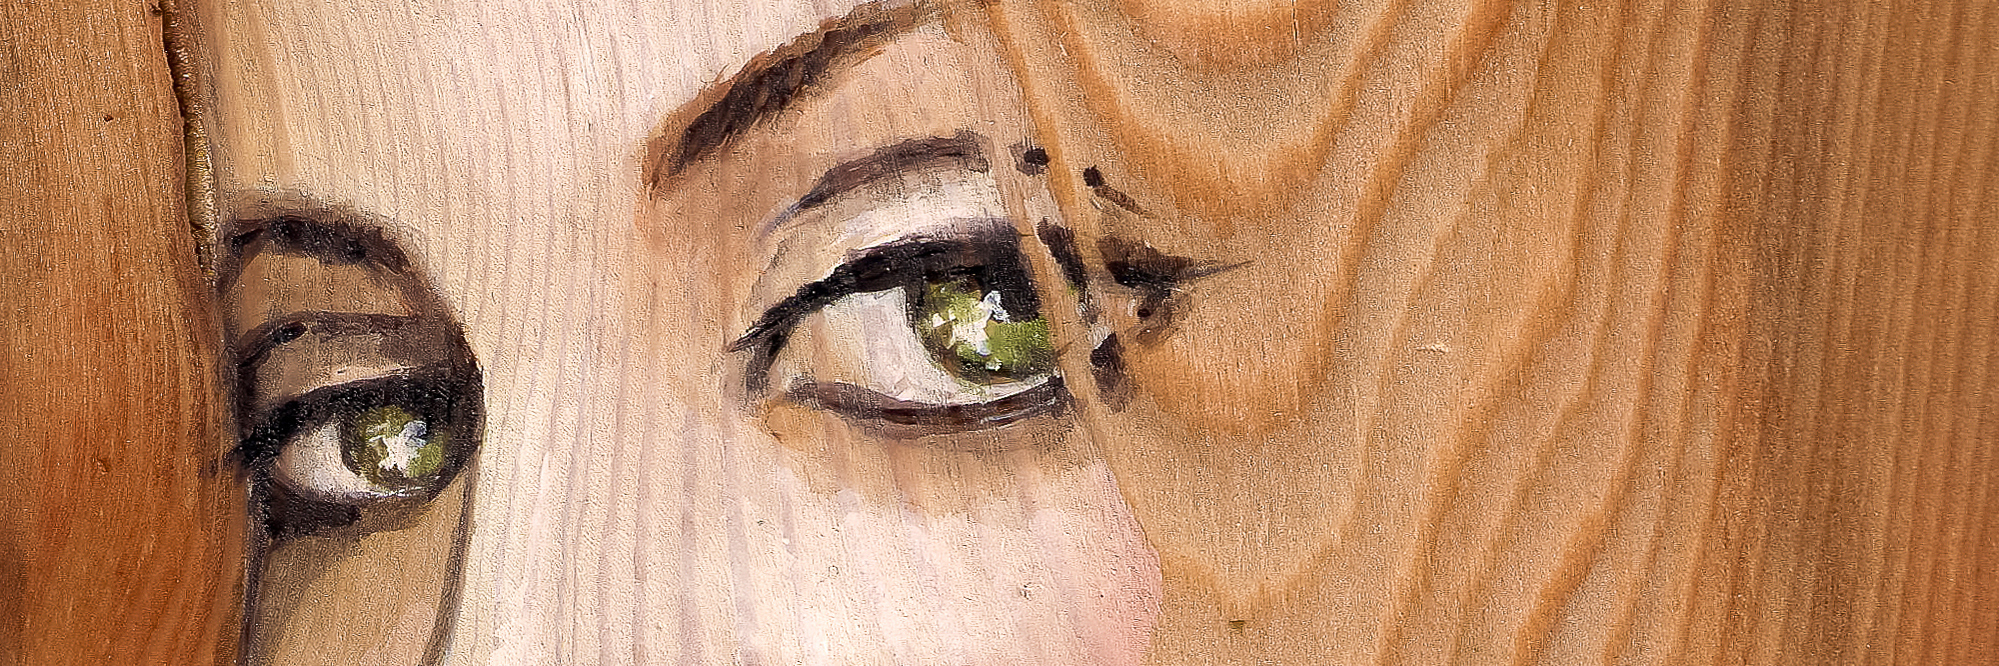 painting of a woman's face on wood